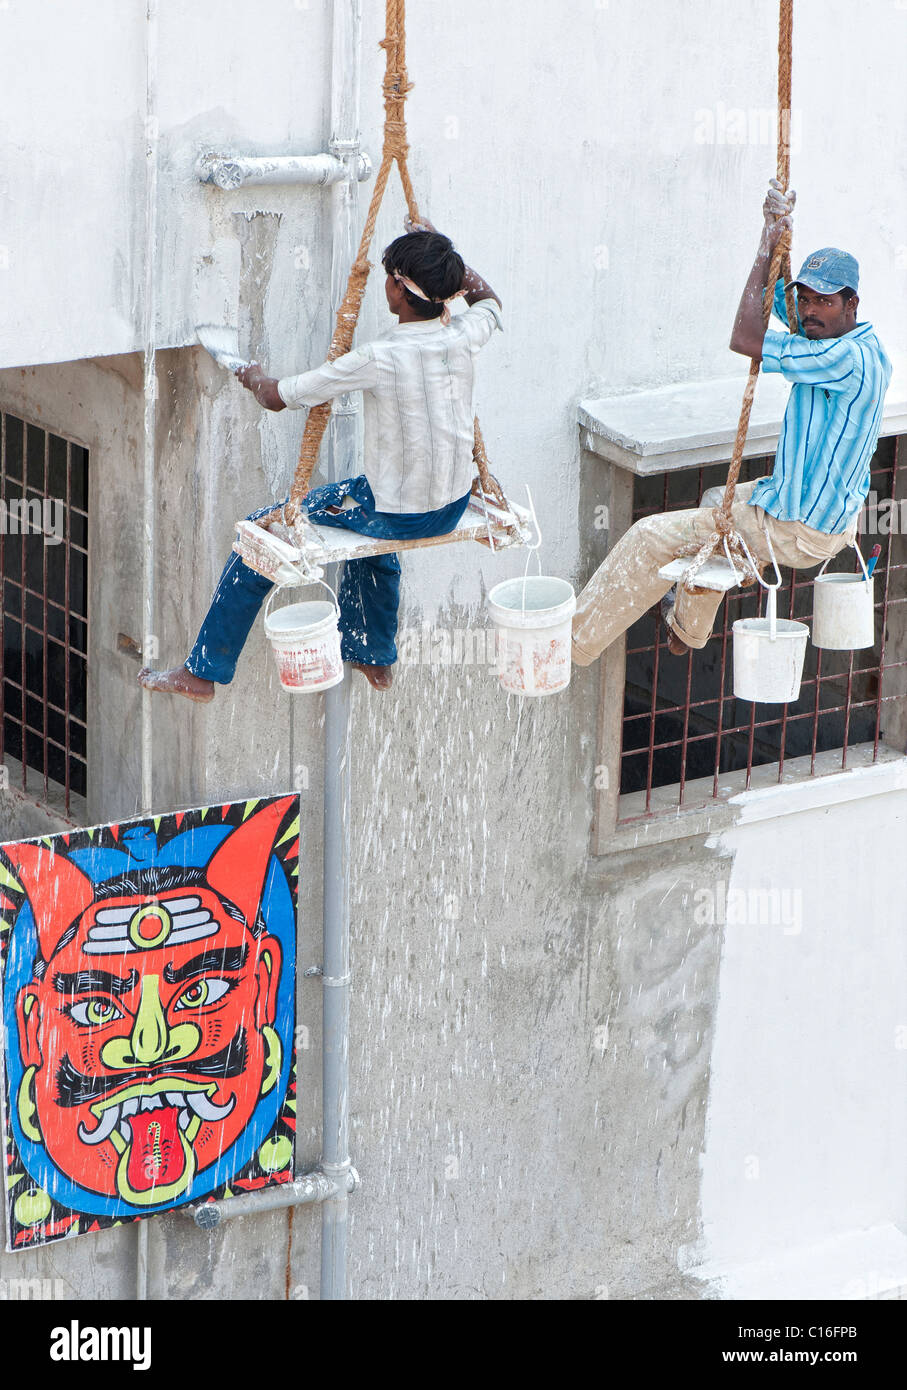 Two indian painters sitting on a wooden seat hanging from ropes painting the side of an apartment complex. Puttaparthi, Andhra Pradesh, India Stock Photo